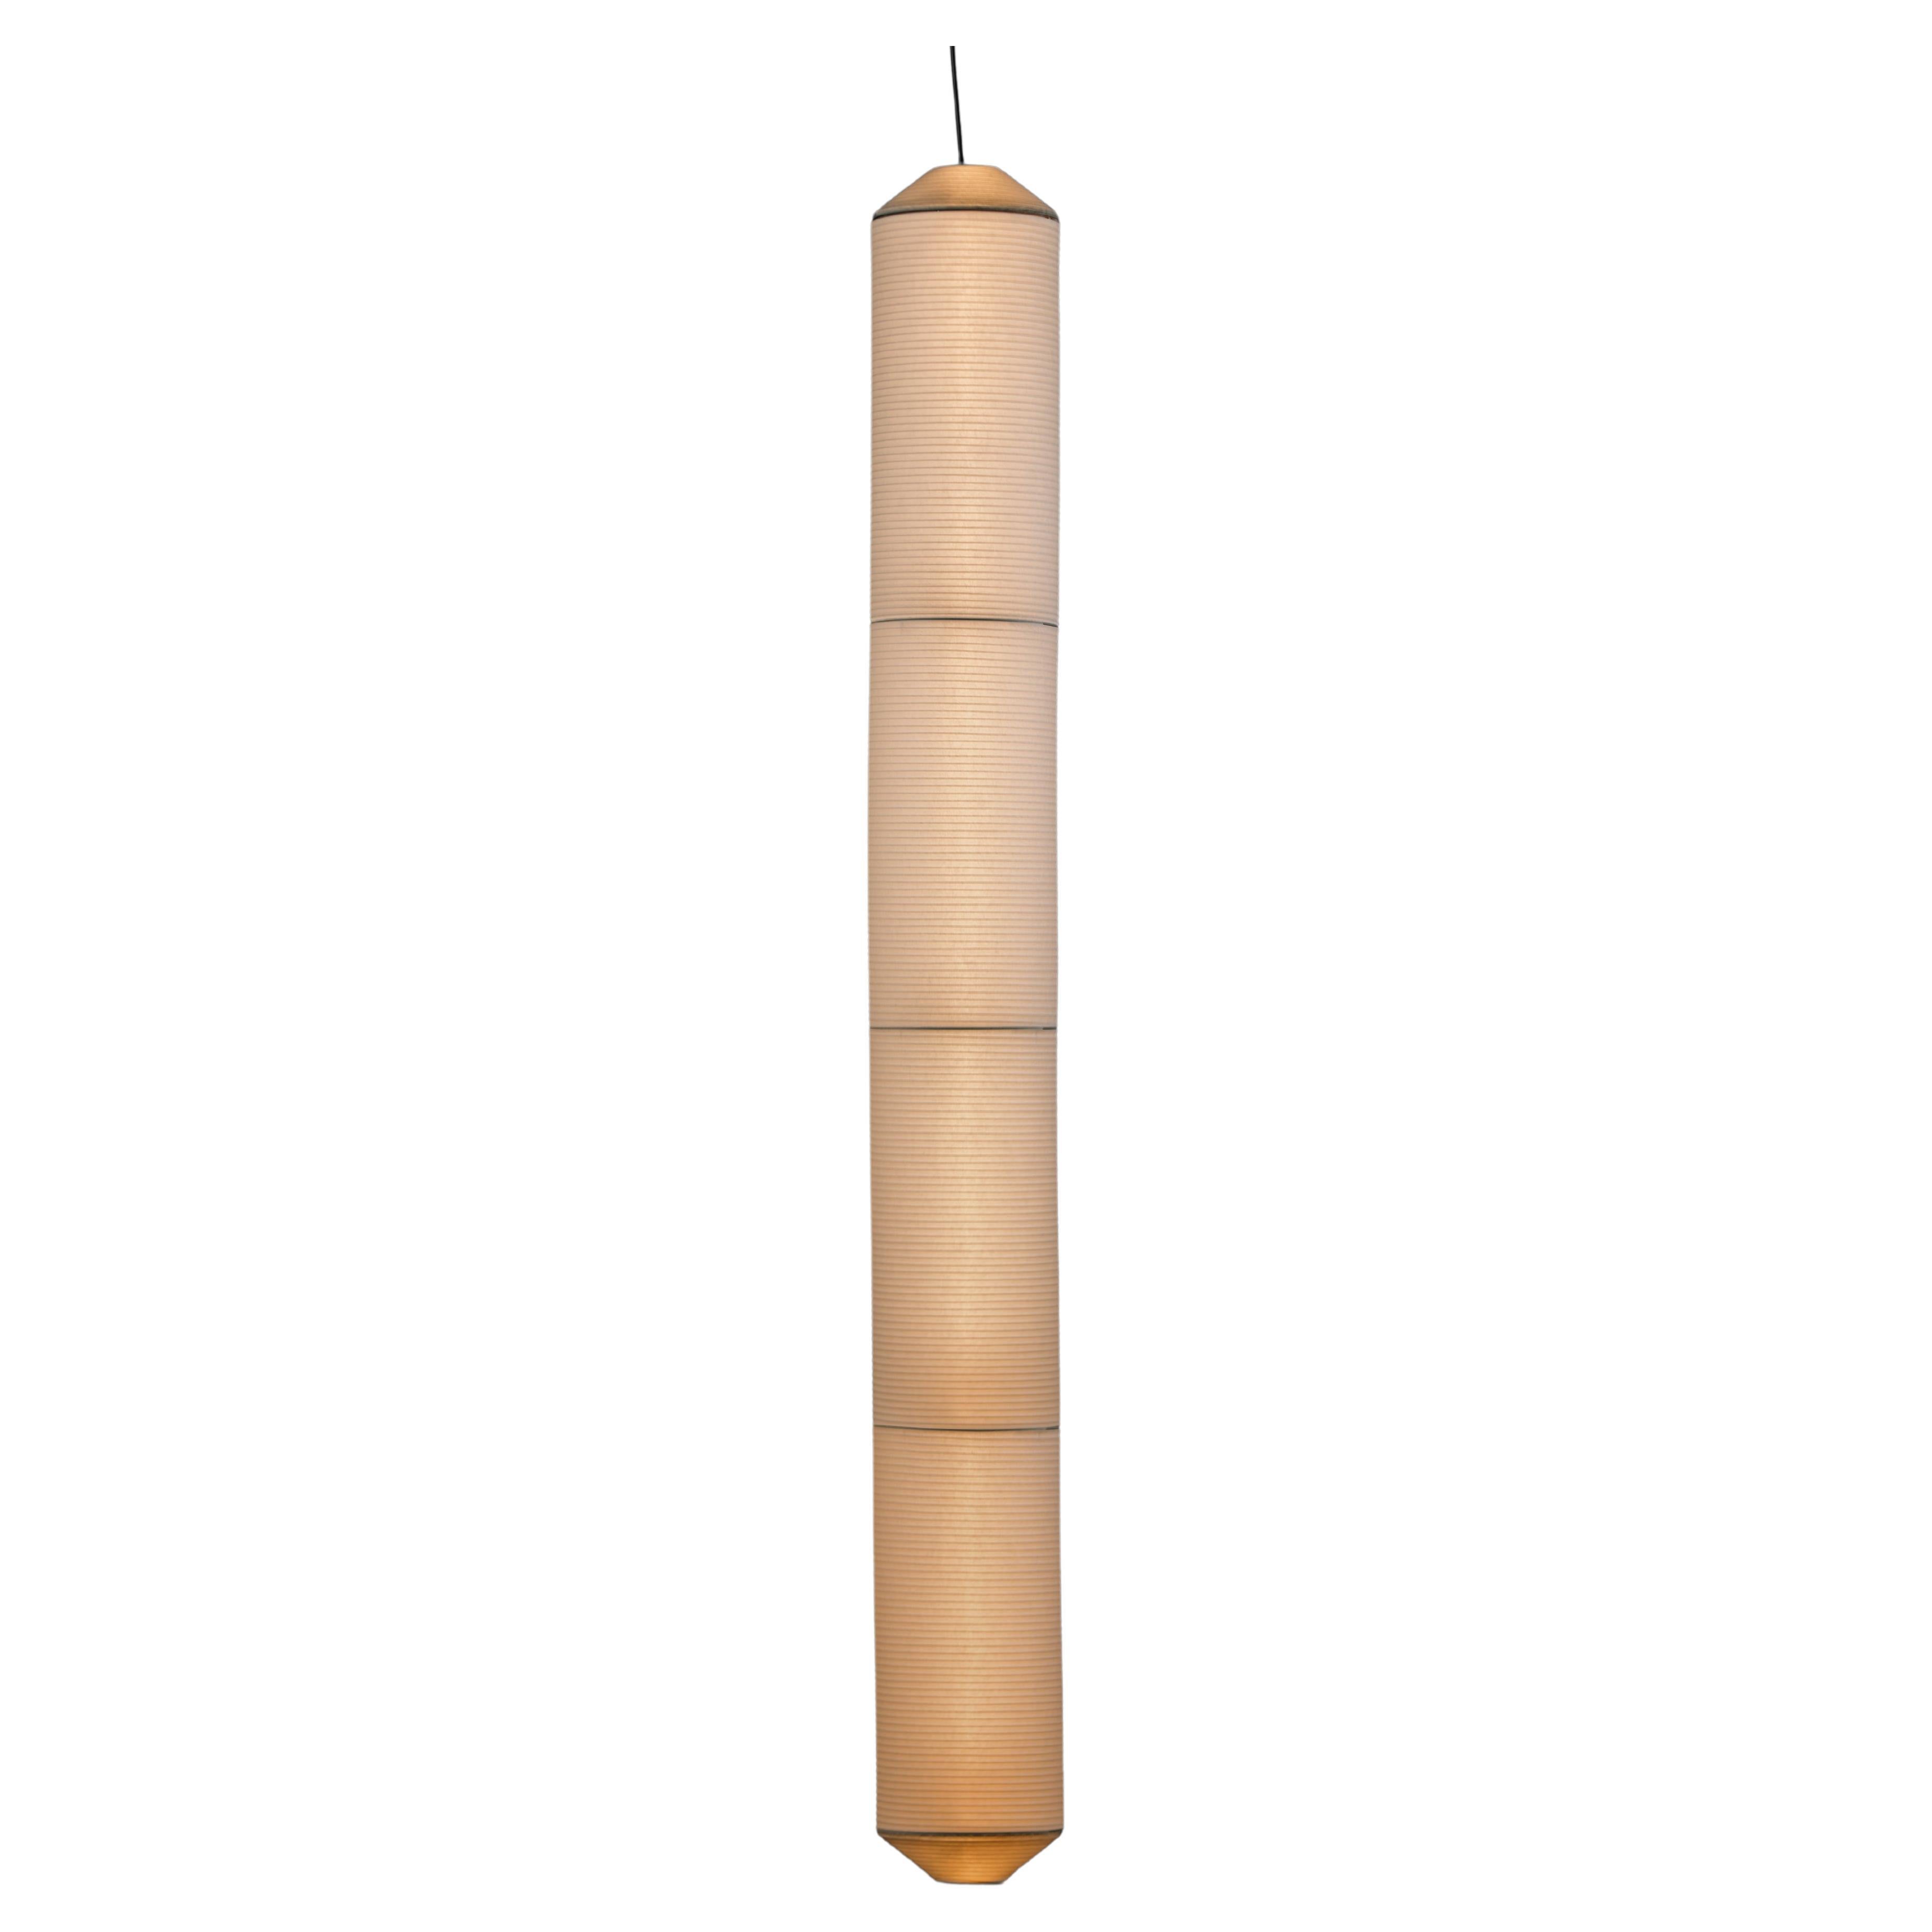 Tekiò Vertical P4 Pendant Lamp by Anthony Dickens